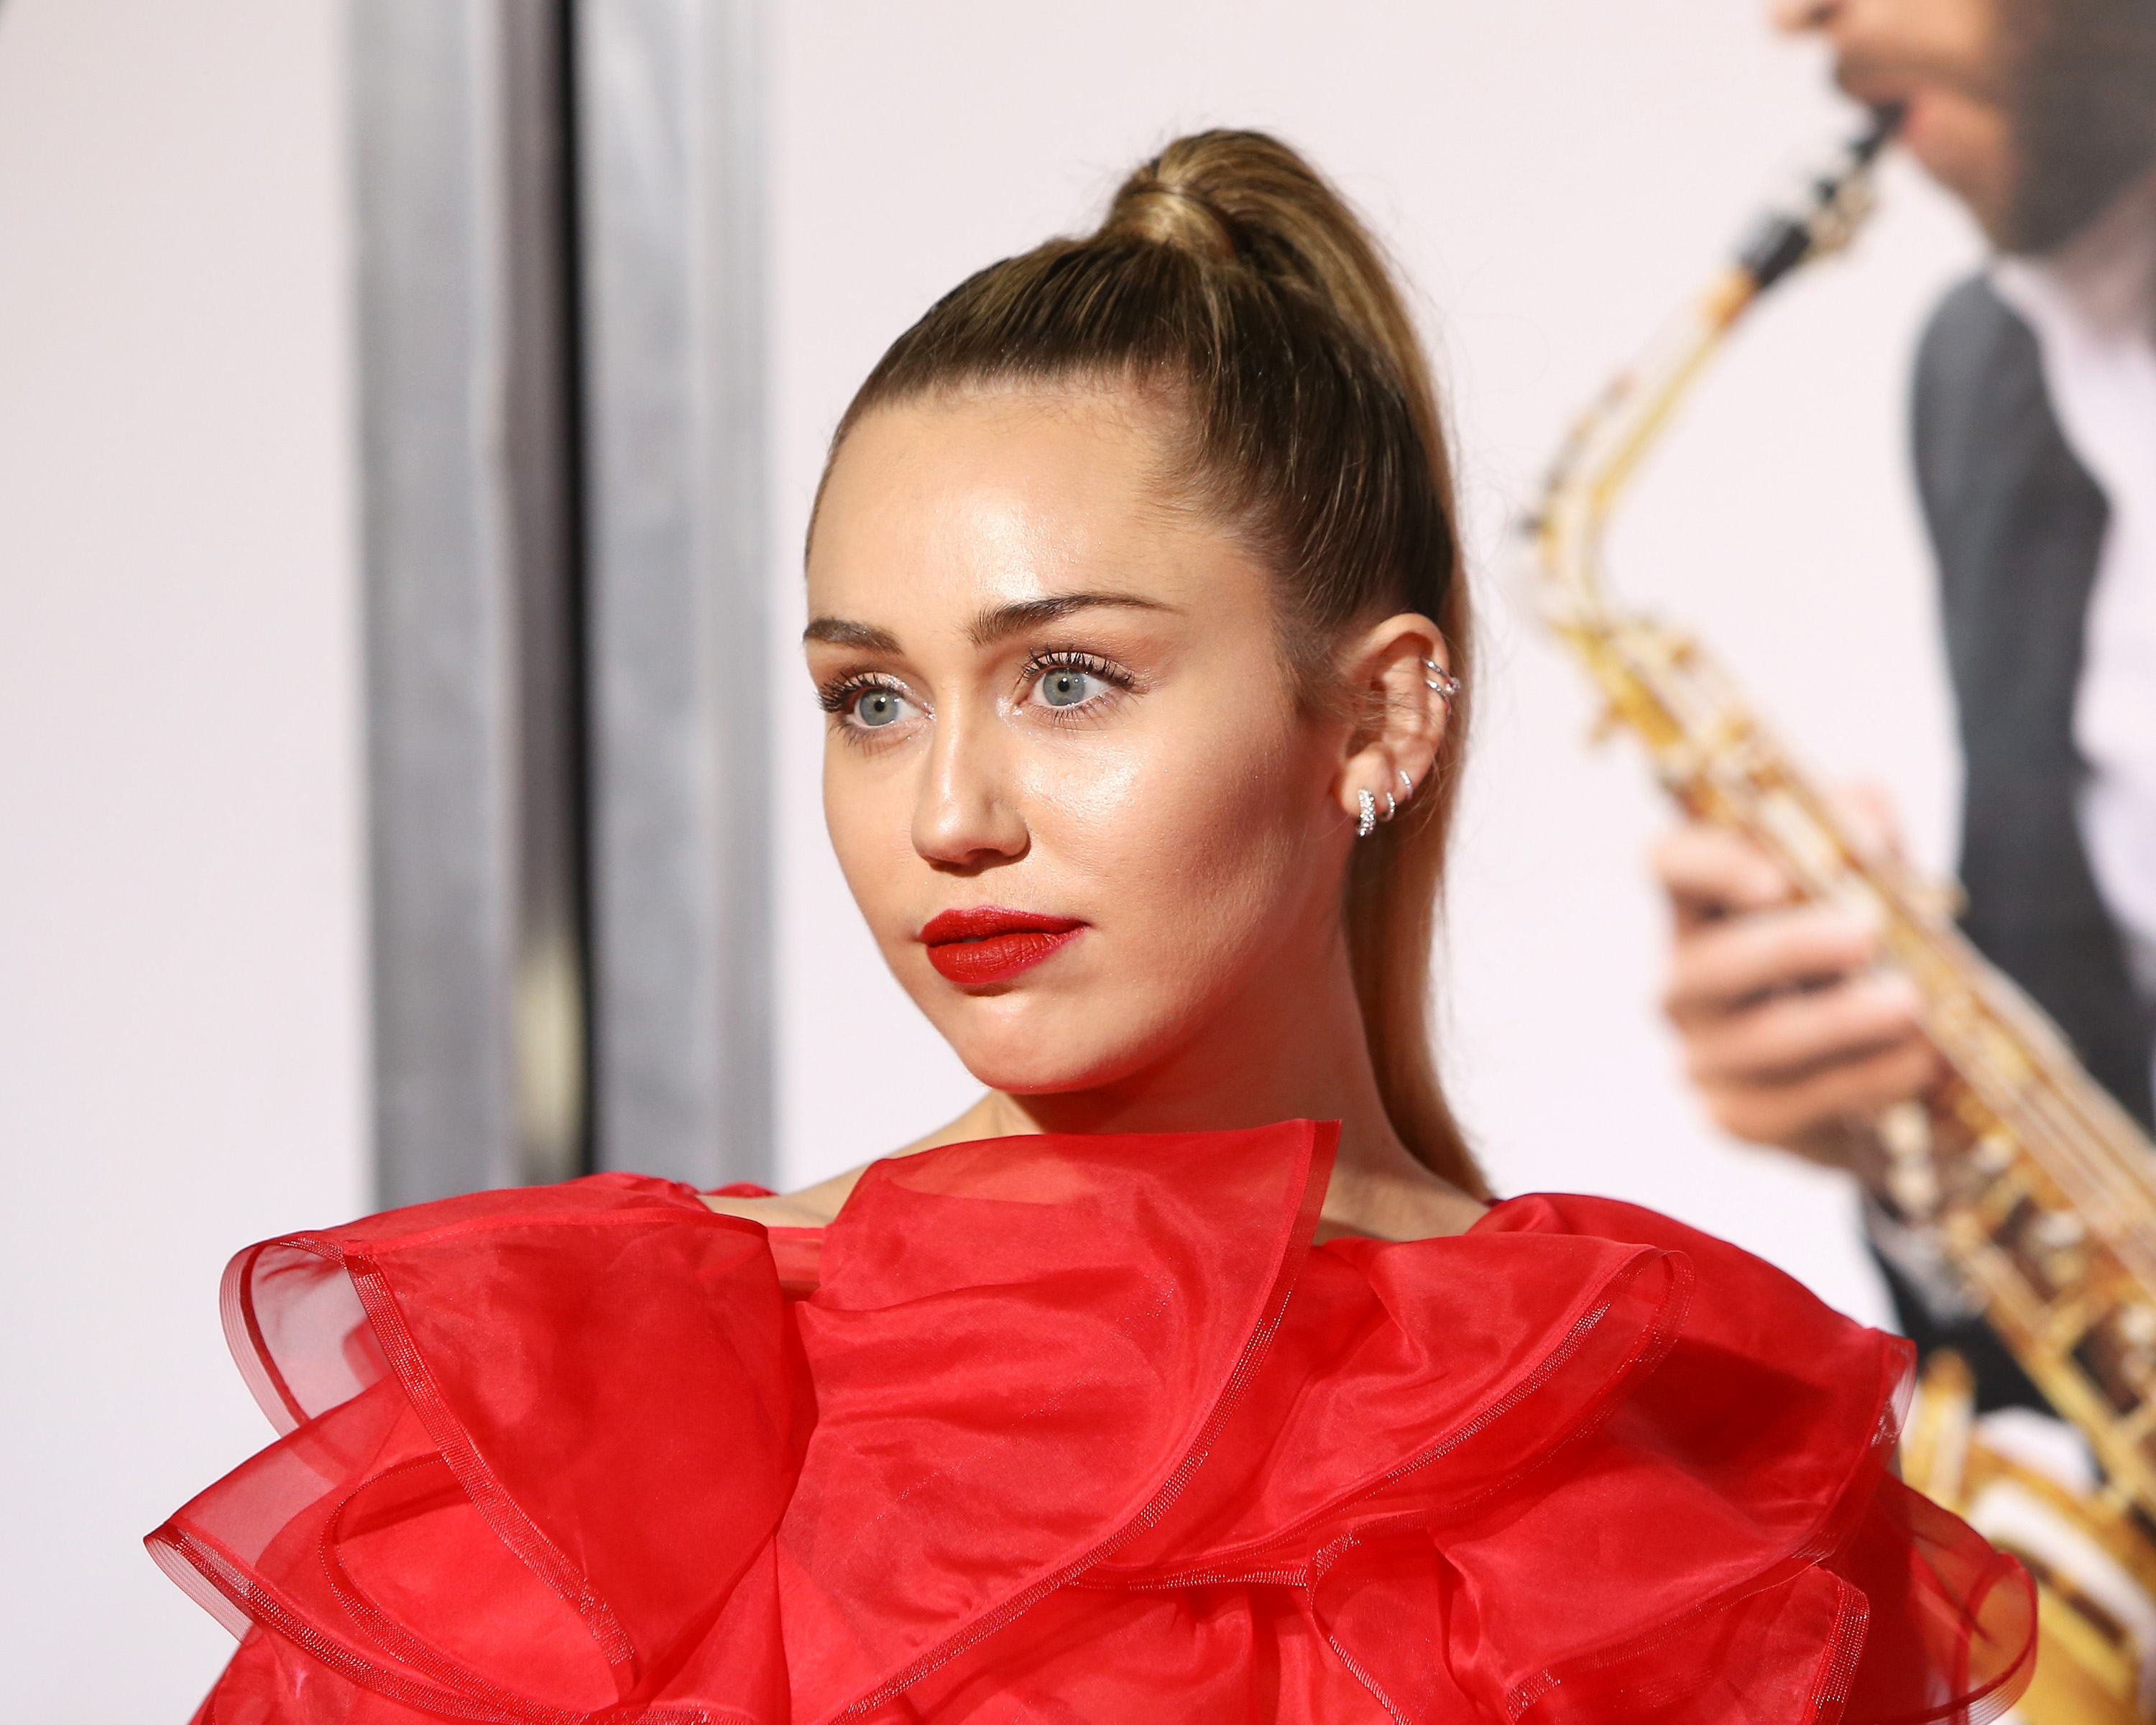 Celebrity Miley Cyrus Thrills Web Fans with Captivating Teaser Video for Pop Song ‘Jaded’